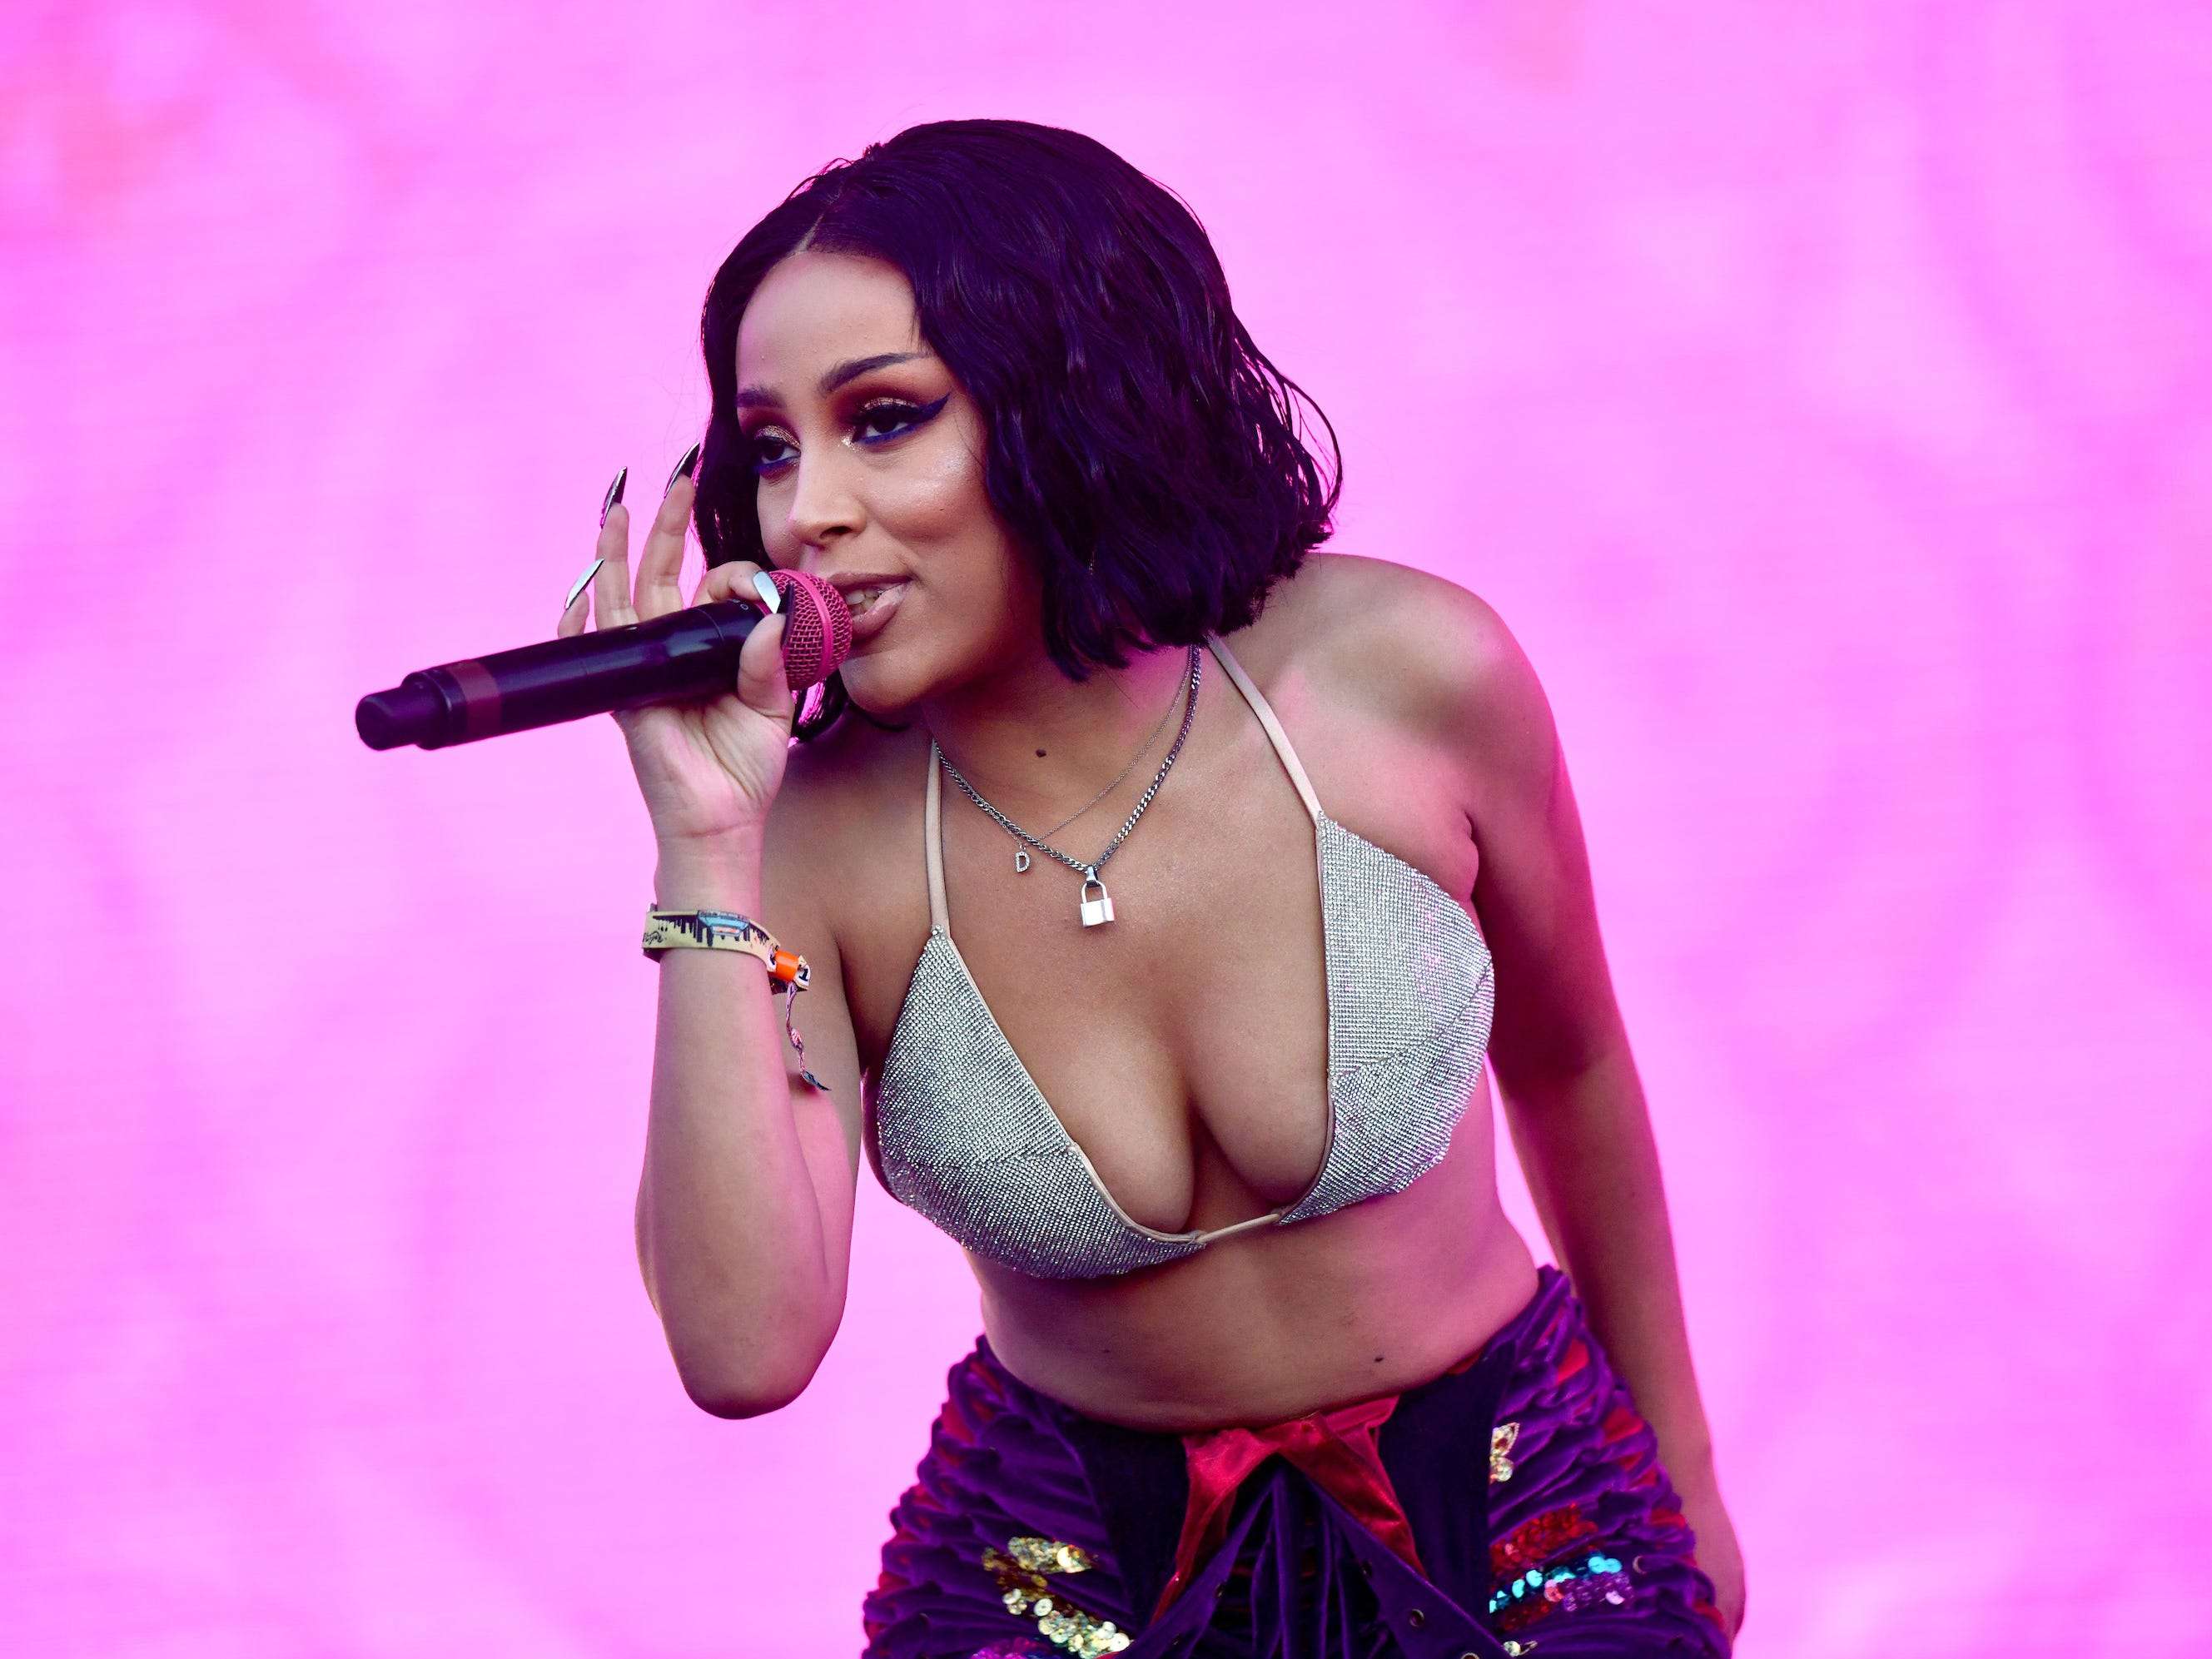 DojaCatIsOverParty explained: Doja Cat accused of being racist - Insider